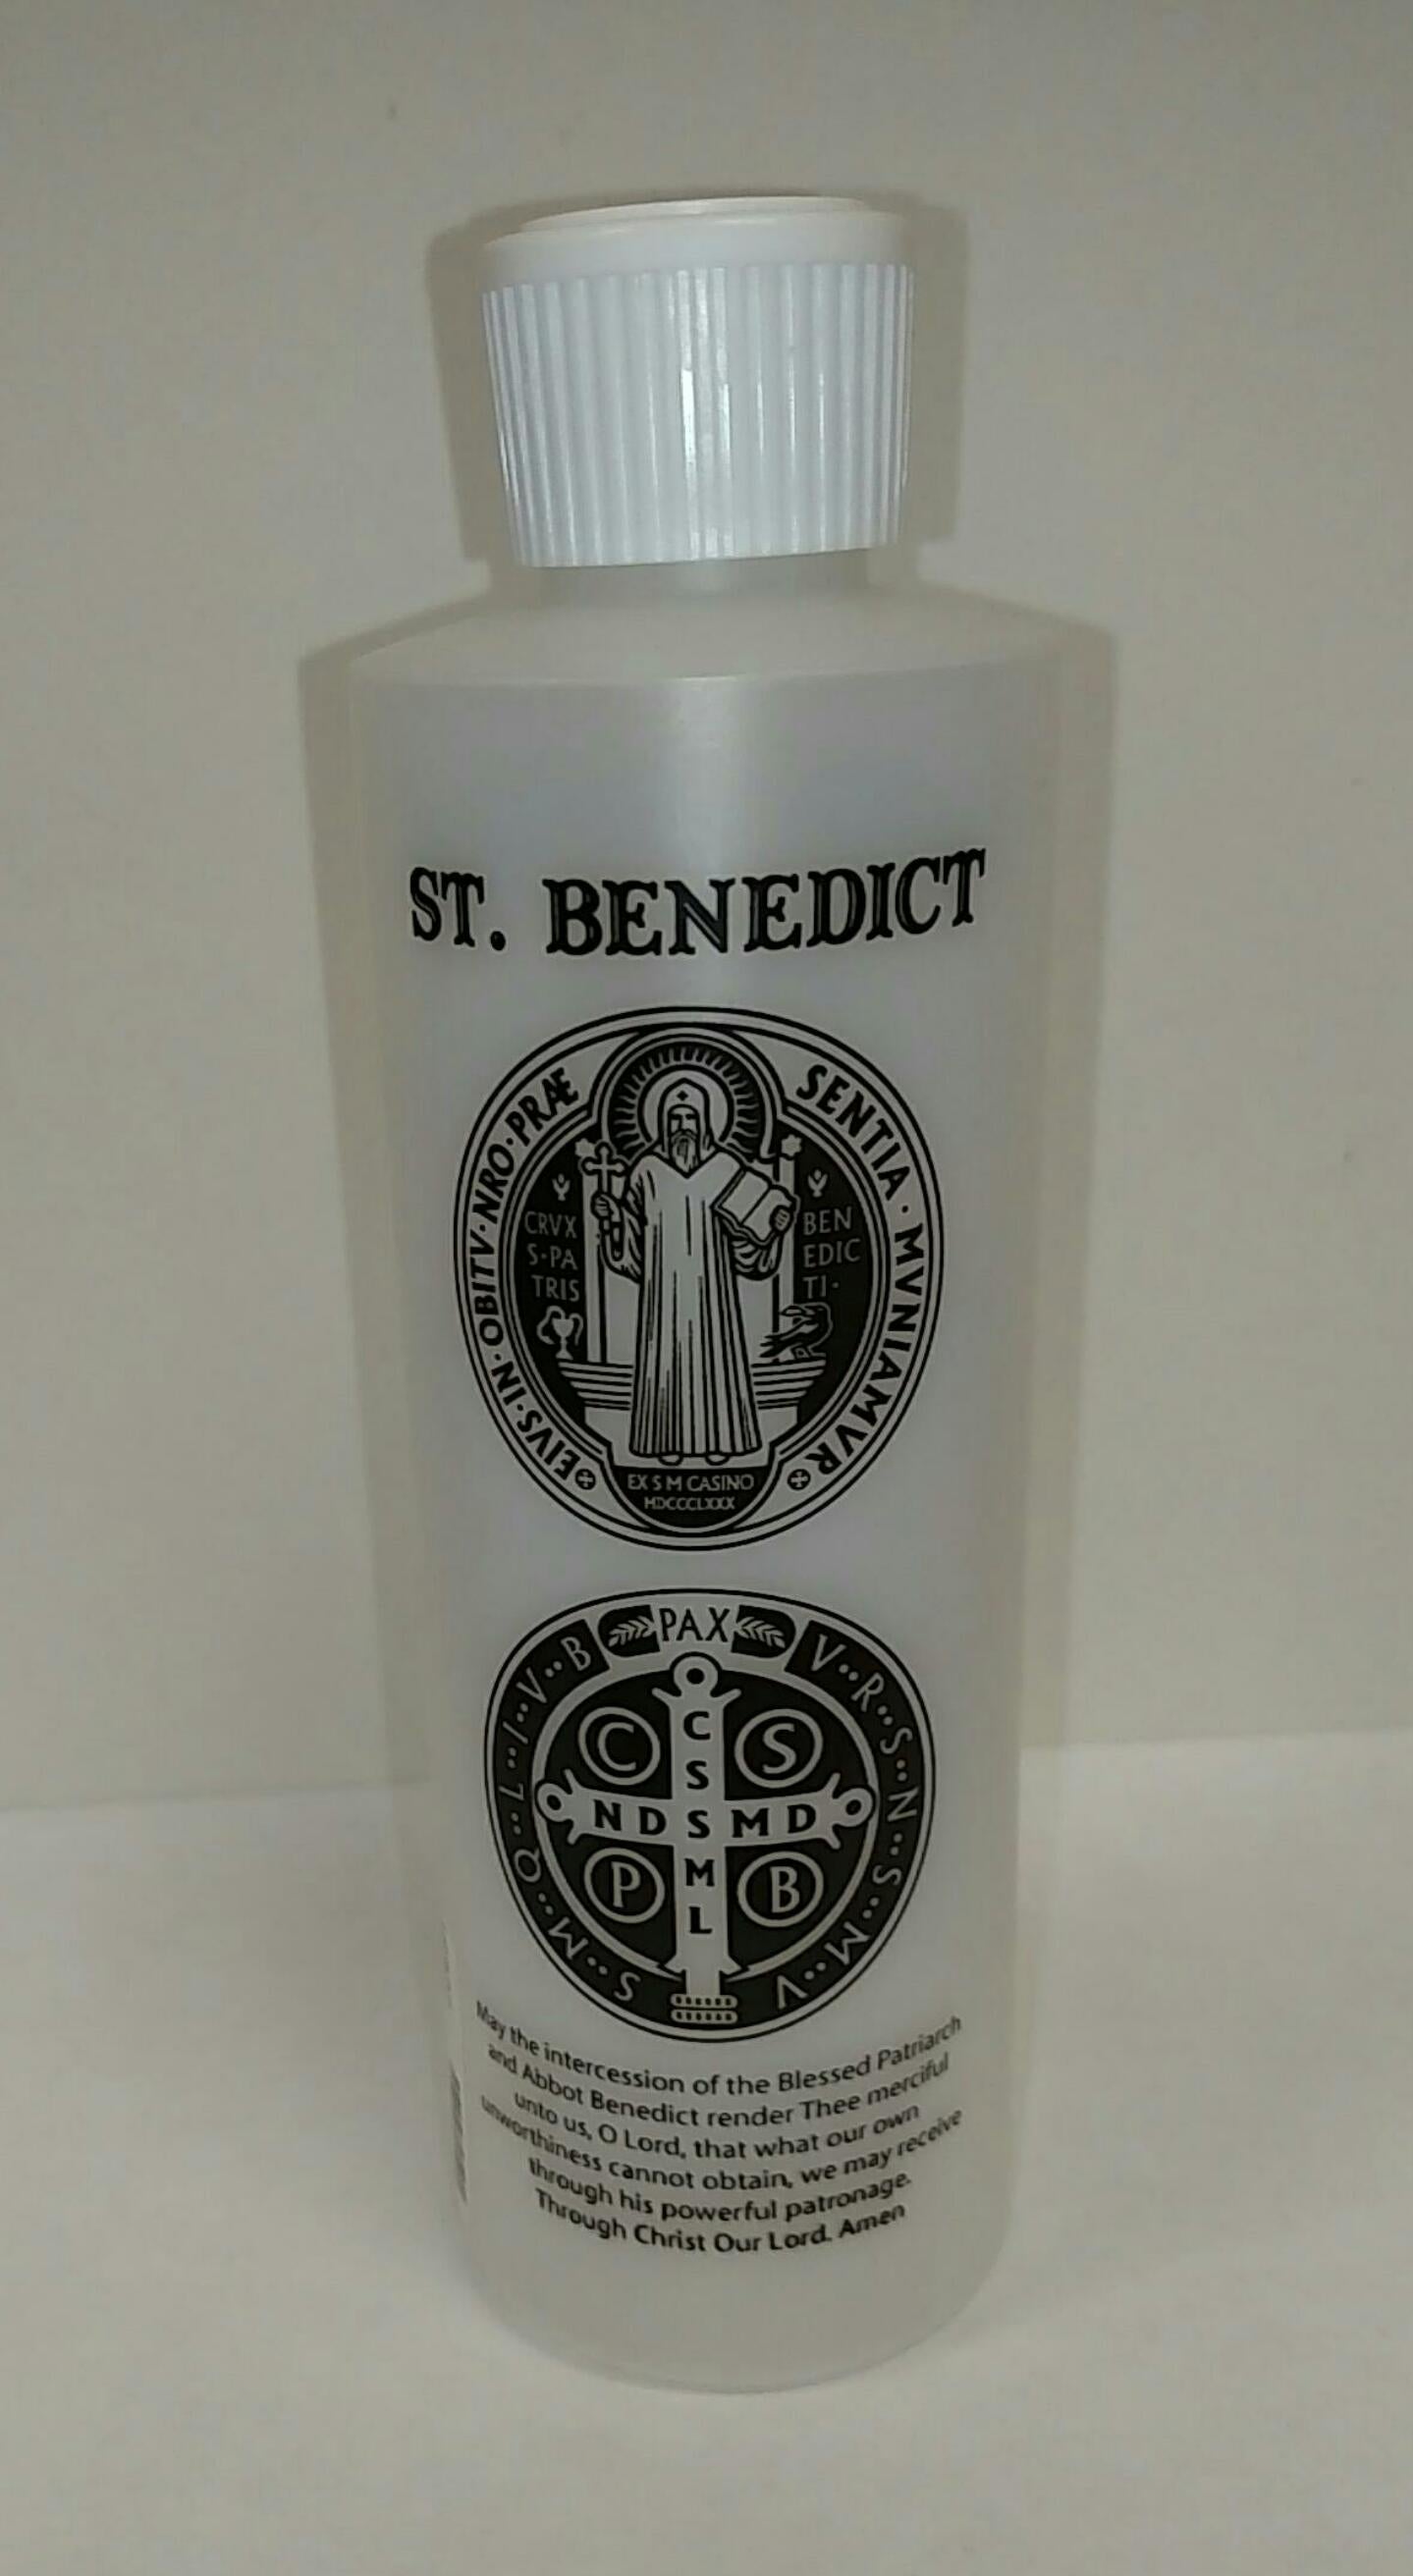 St. Benedict Holy Water bottle, 8 oz.